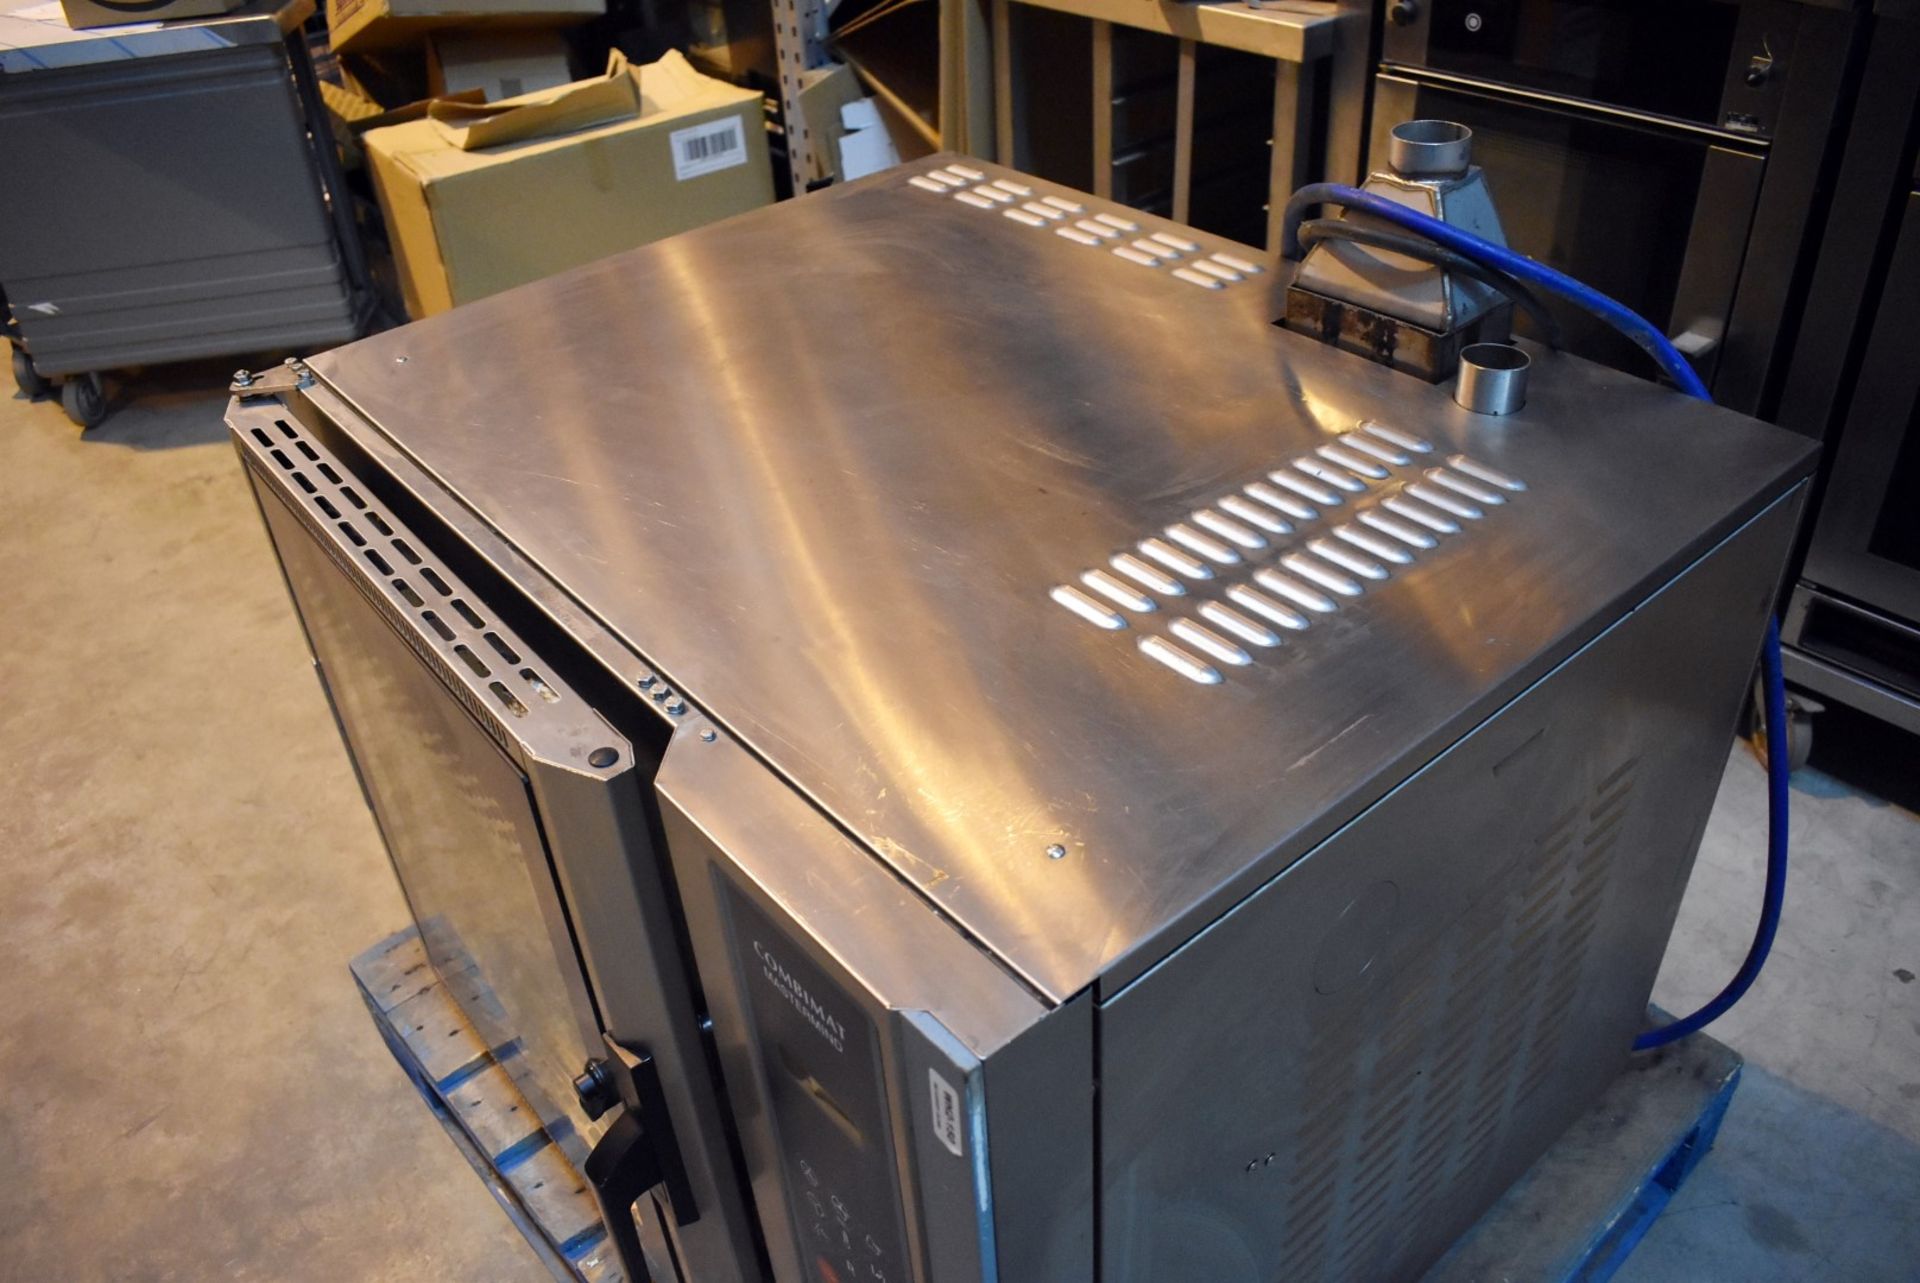 1 x Leventi Combimat mk3.1 Mastermind 6 Grid Combi Steam Oven - 3 Phase - Recently Removed From a - Image 6 of 11